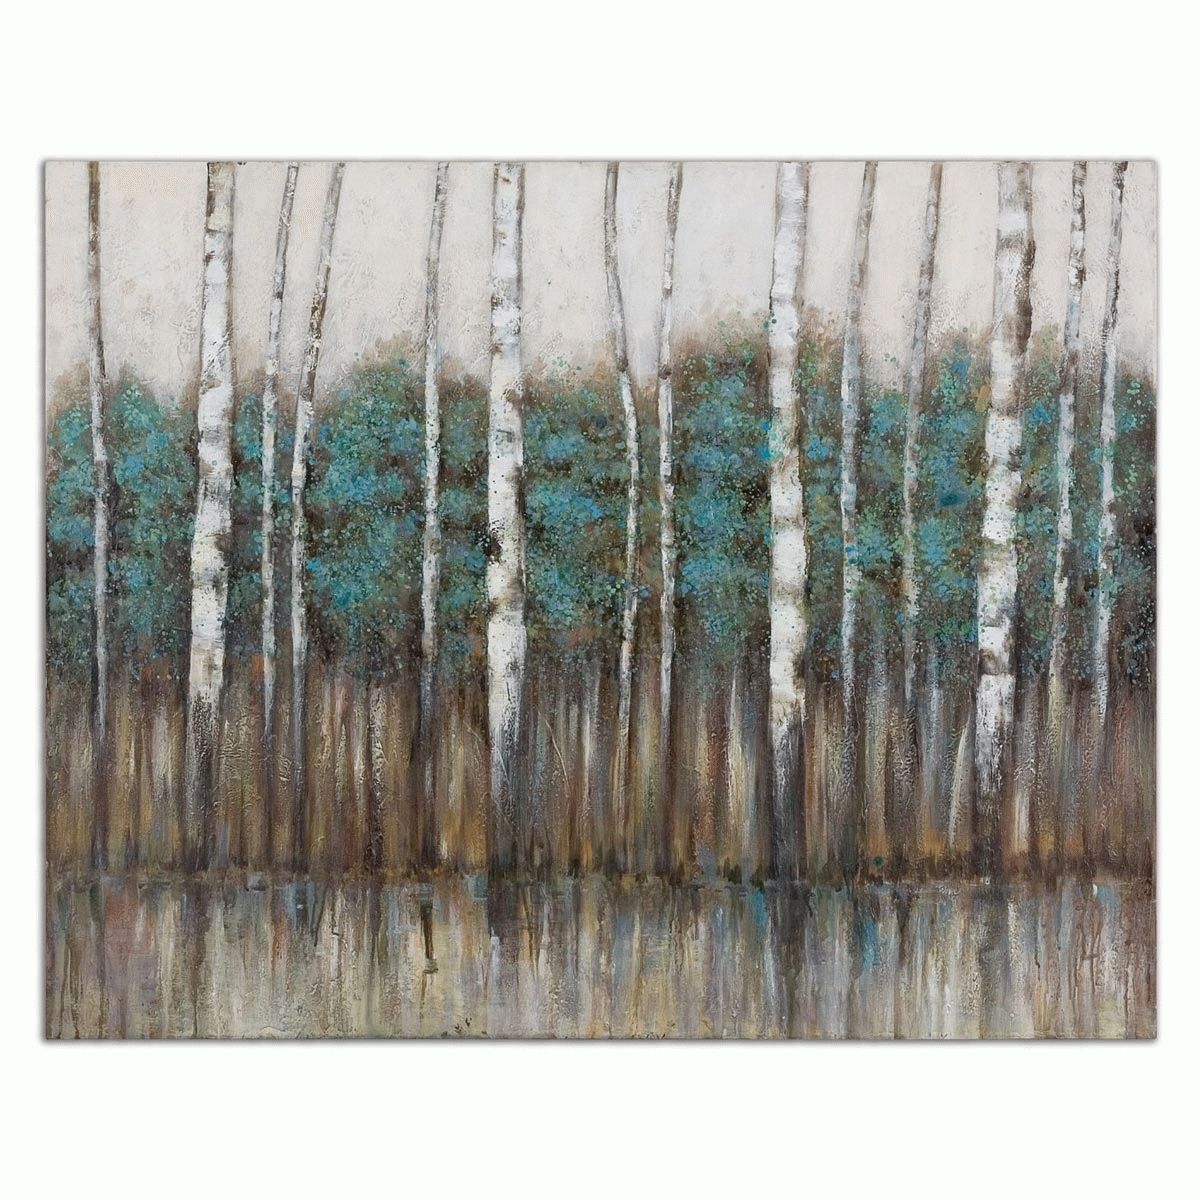 Edge Of The Forest Canvas Wall Art In Teal And Brown Wall Art (View 5 of 20)